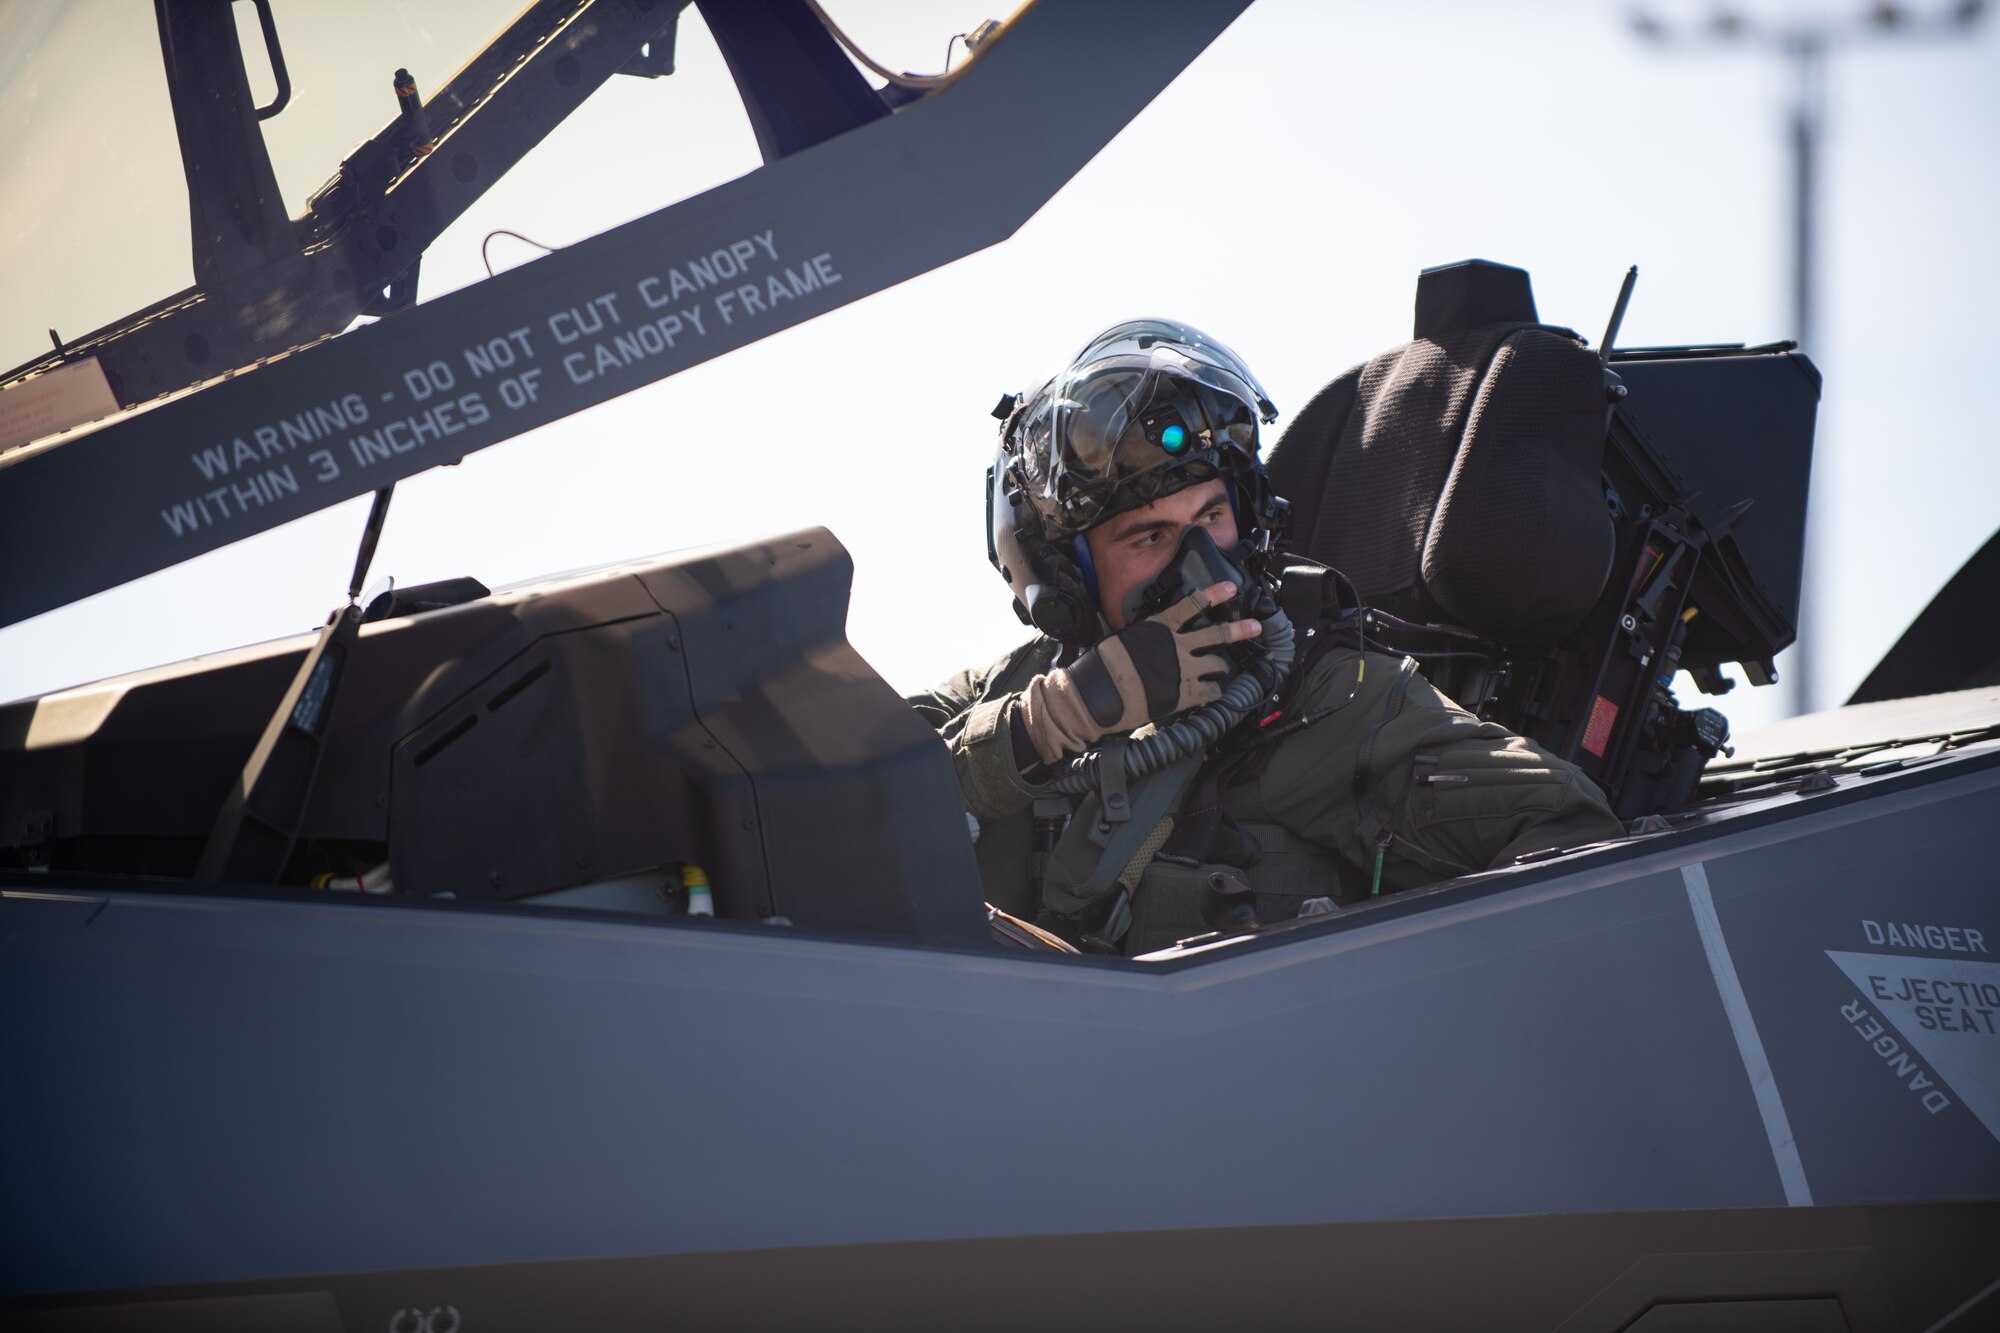 1st Lt. Zachari Mertes, assigned to the 134th Fighter Squadron, Vermont Air National Guard, prepares for launch in an F-35A Lightning II during a training exercise